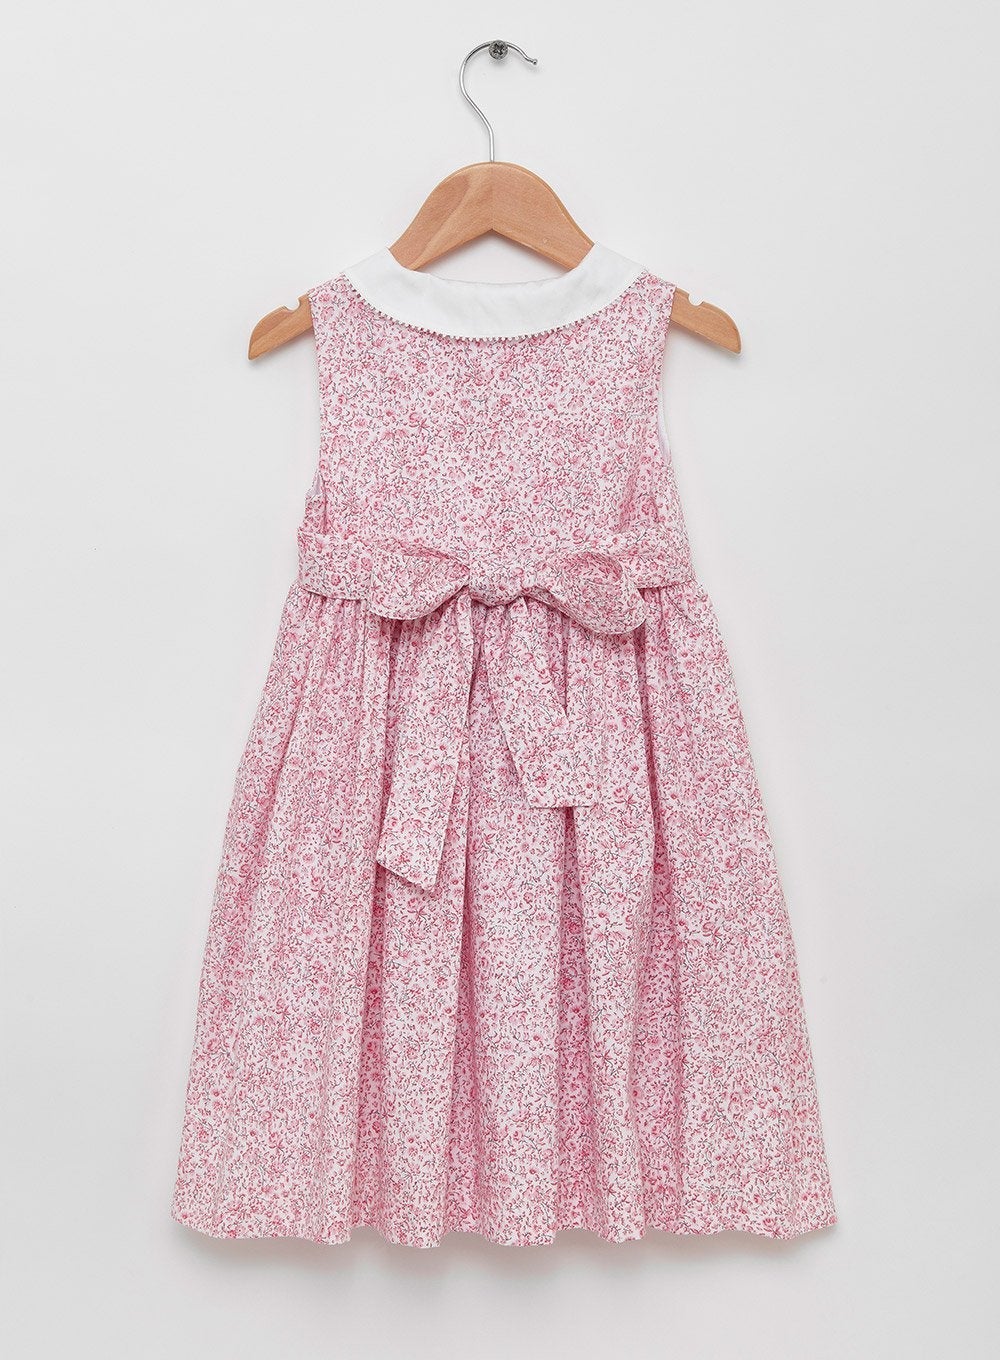 Confiture Dress Clara Button Dress in Pink Ditsy